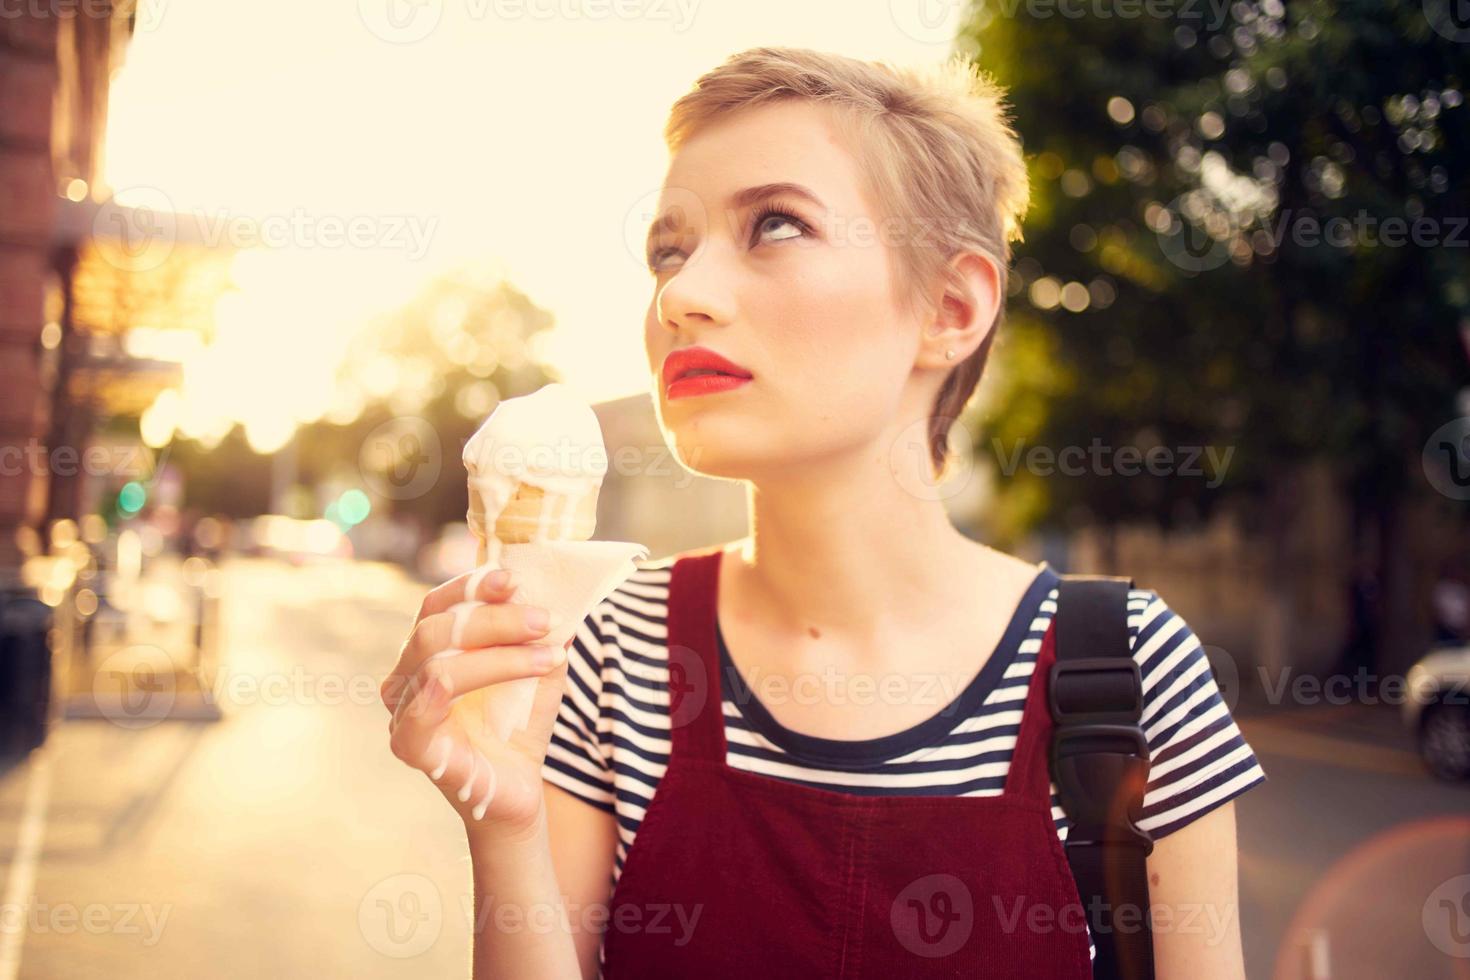 short haired woman outdoors eating ice cream walk lifestyle photo